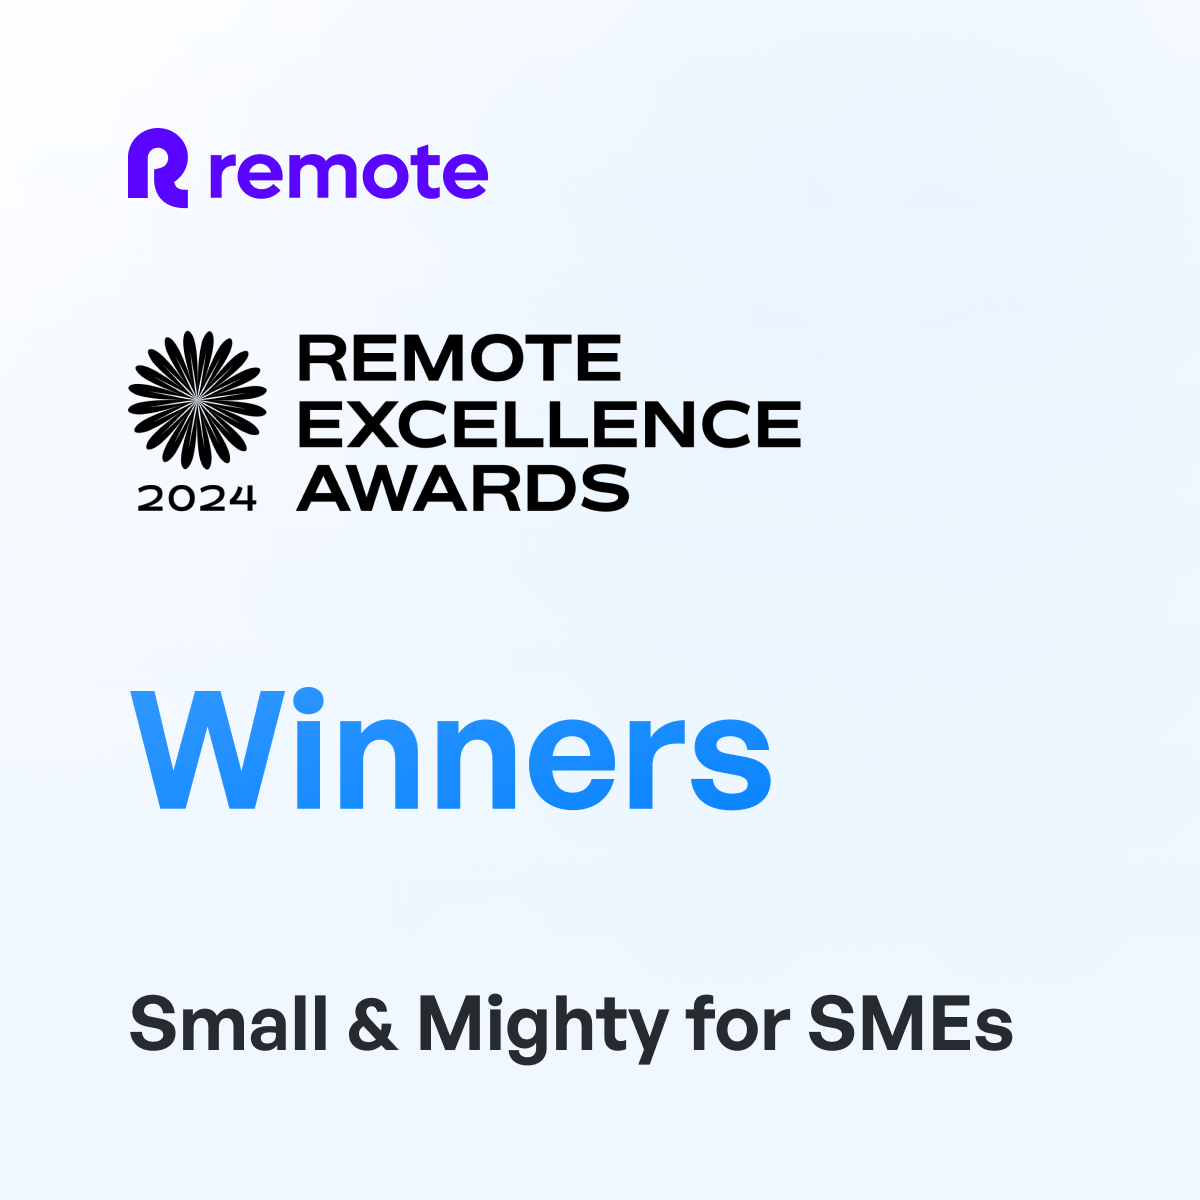 MUI is the winner of the Remote Excellence Awards in the Small and Mighty for SMEs category.